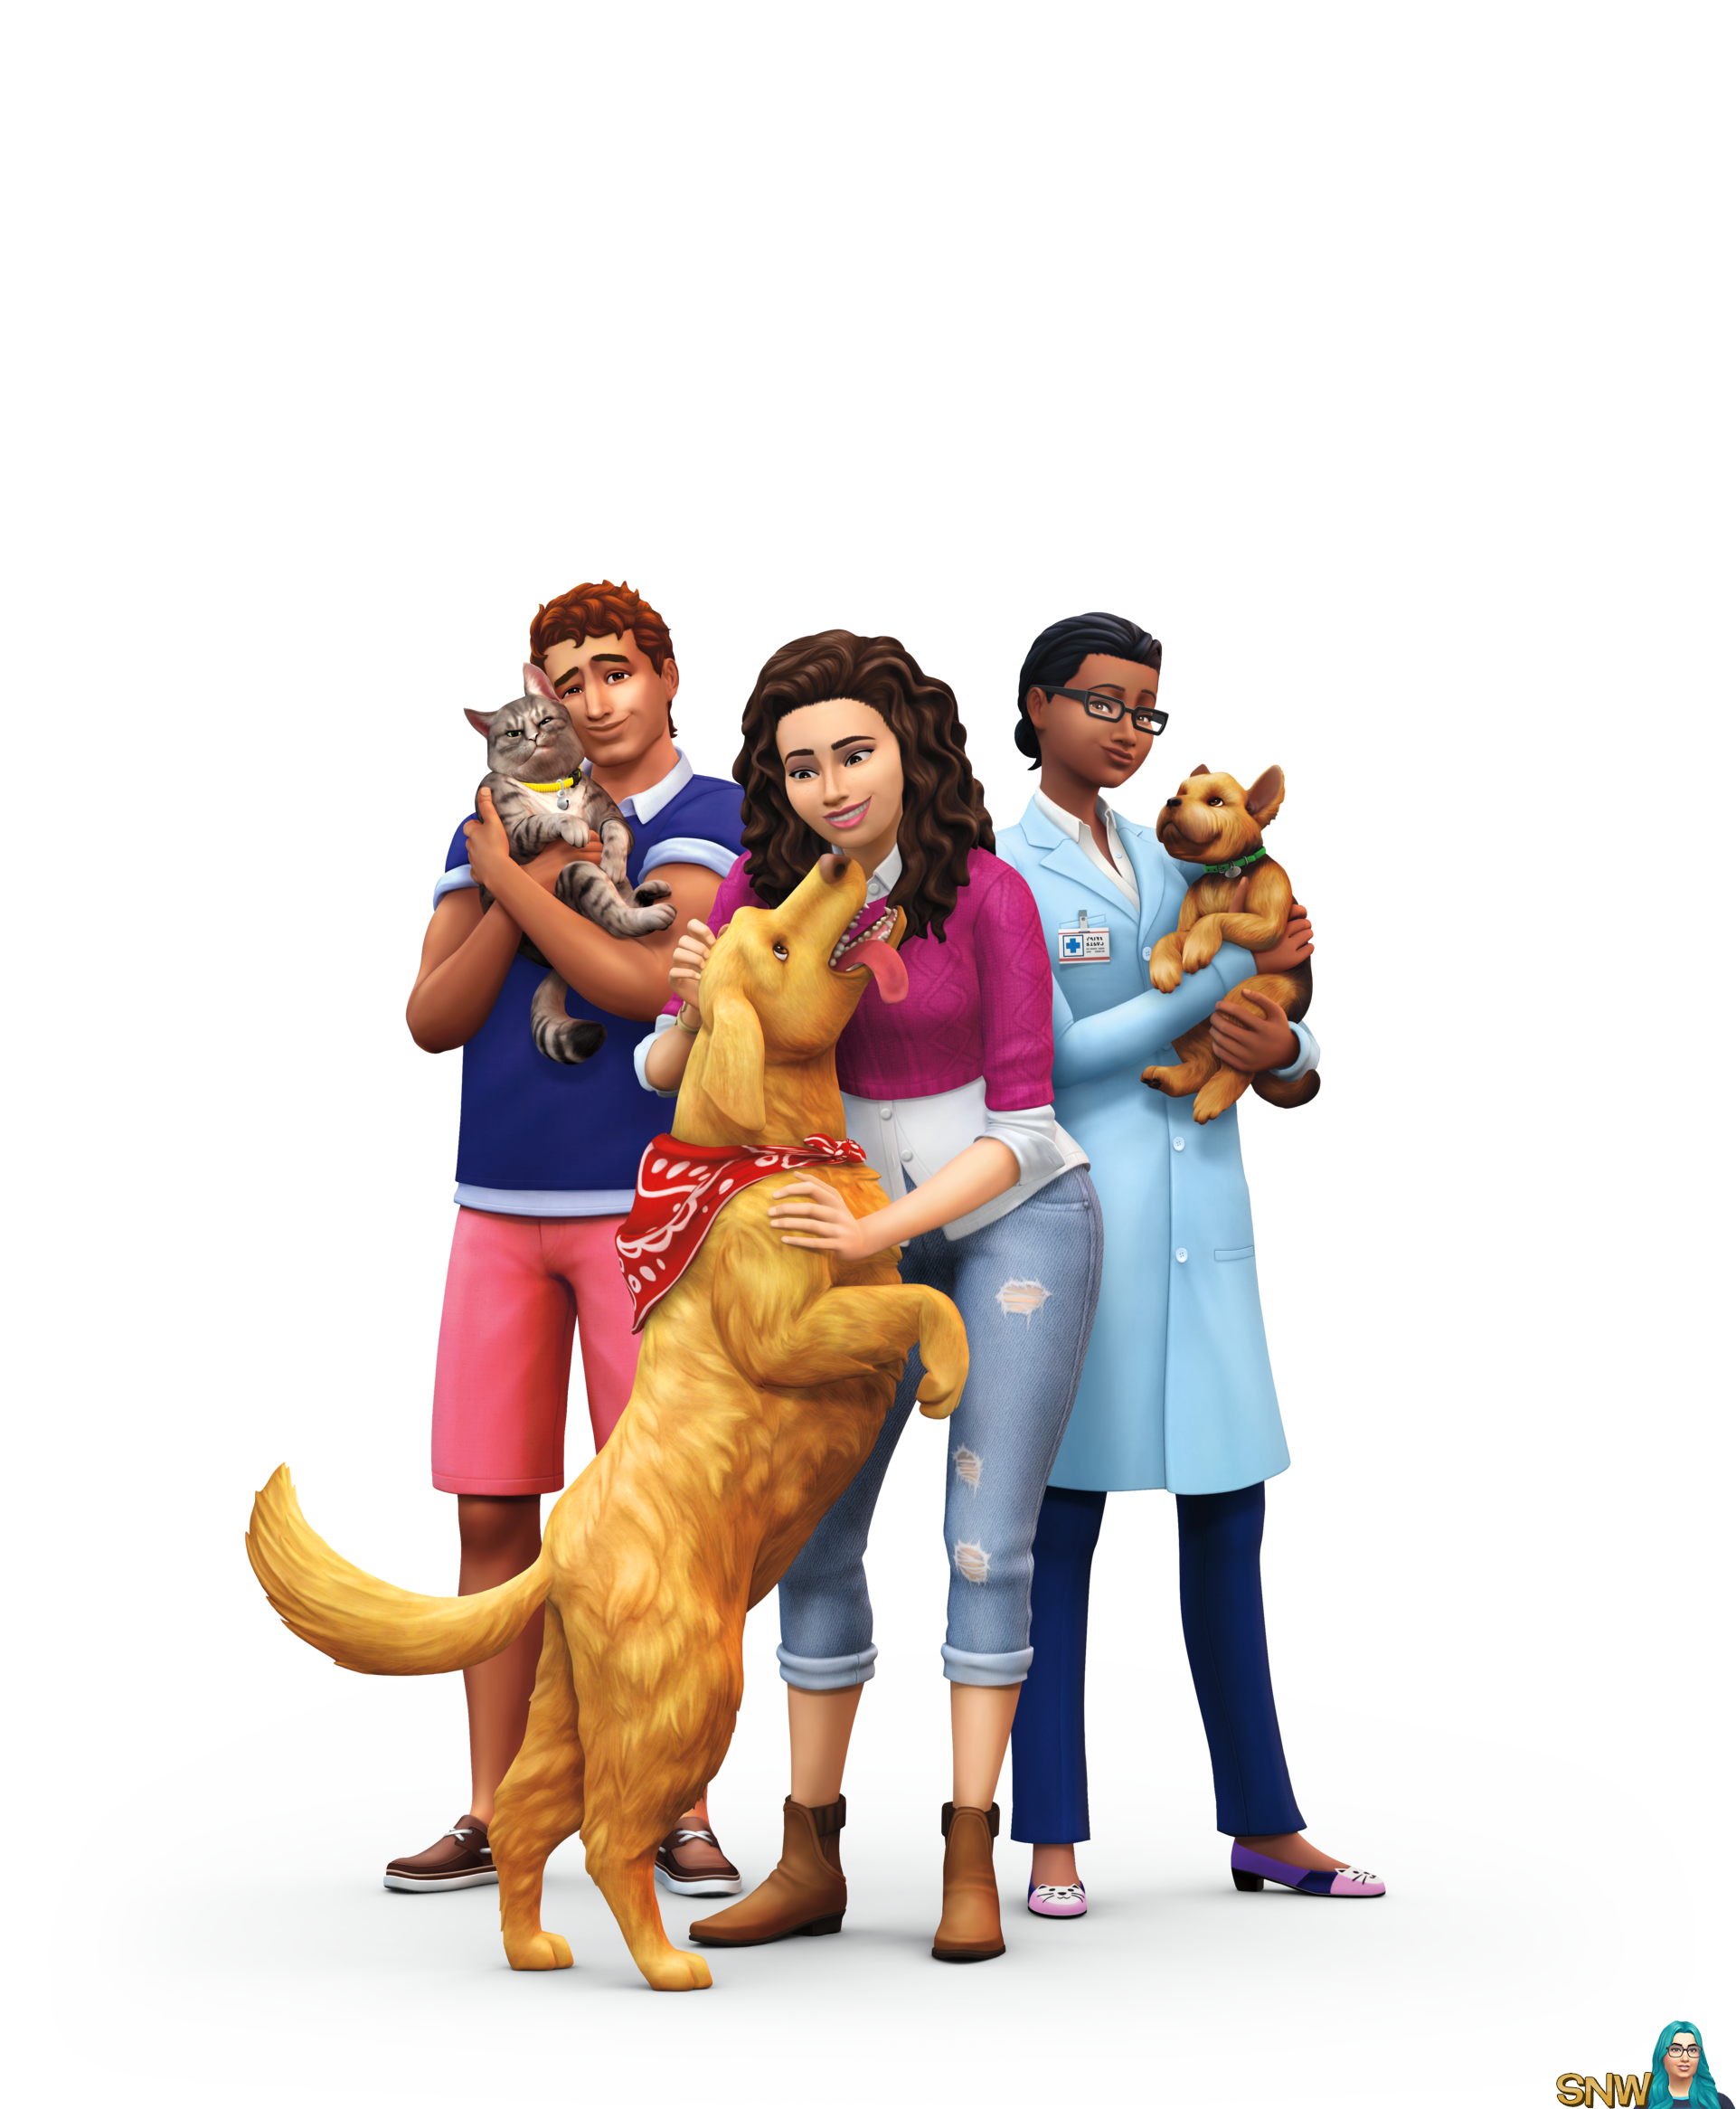 The Sims 4: Cats & Dogs render artwork